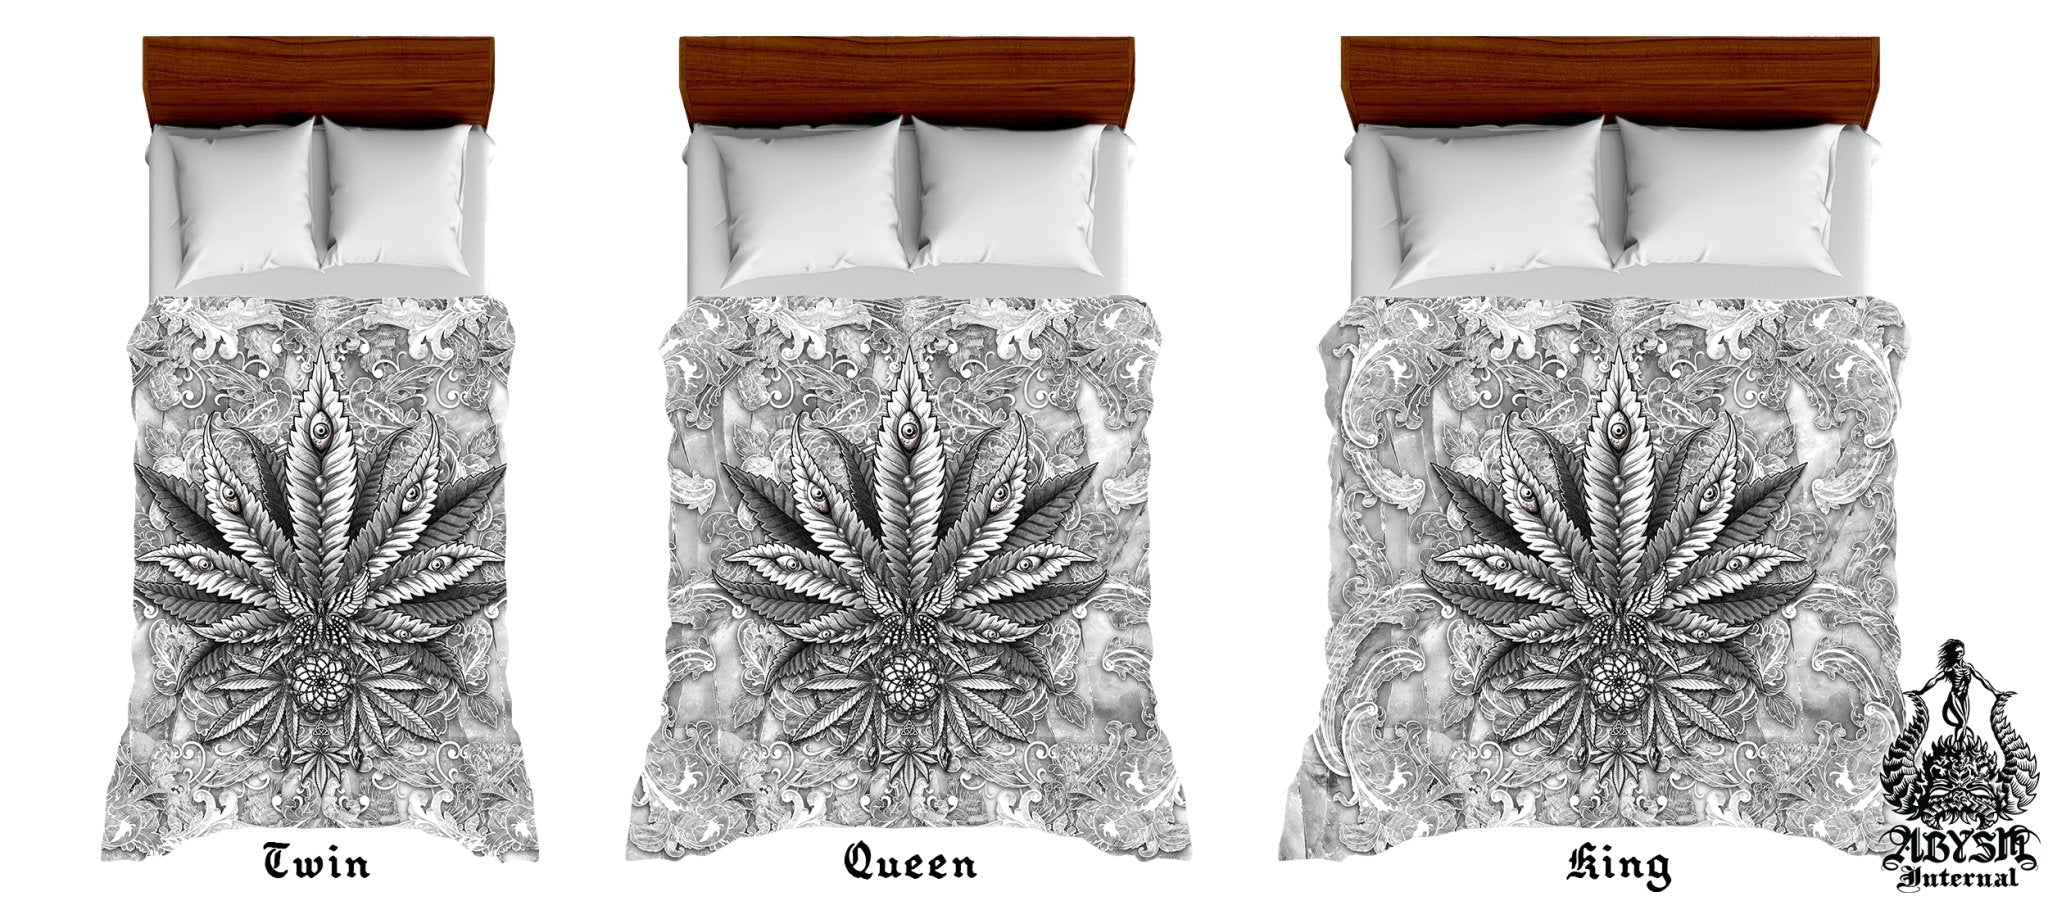 Weed Bedding Set, Comforter and Duvet, Cannabis Bed Cover, Marijuana Bedroom Decor, King, Queen and Twin Size, 420 Room Art - White Goth, Black and White, Stone - Abysm Internal